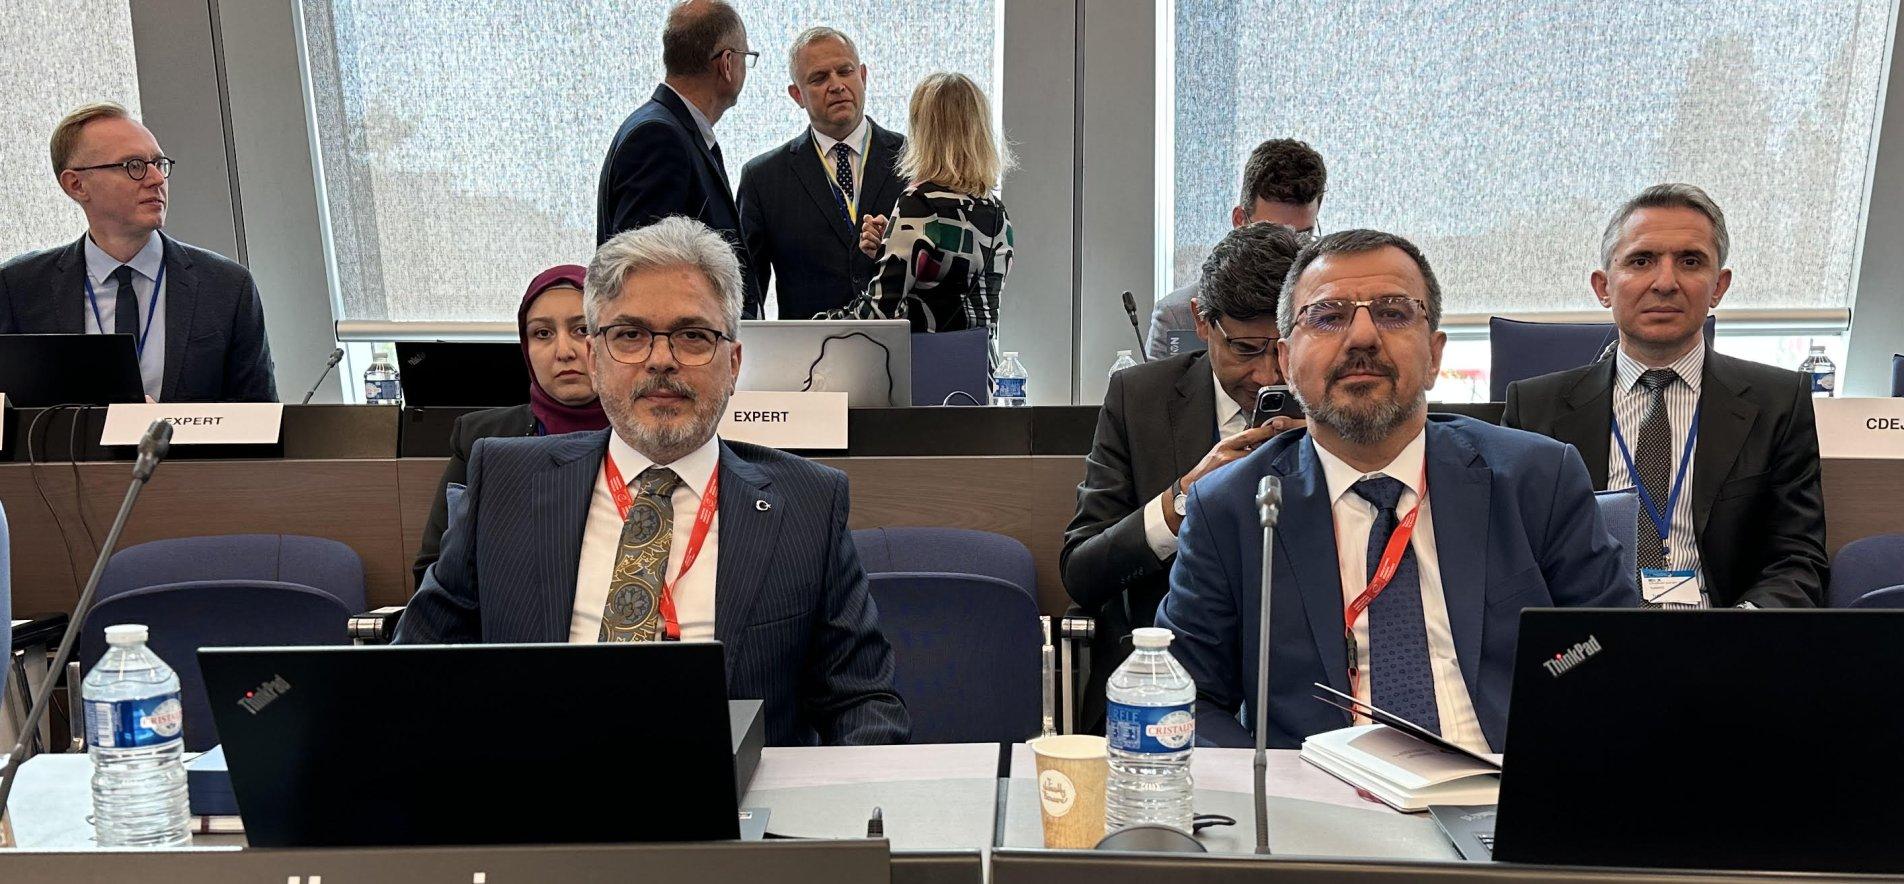 DEPUTY MINISTER YELKENCİ ATTENDS COUNCIL OF EUROPE STANDING CONFERENCE OF MINISTERS OF EDUCATION